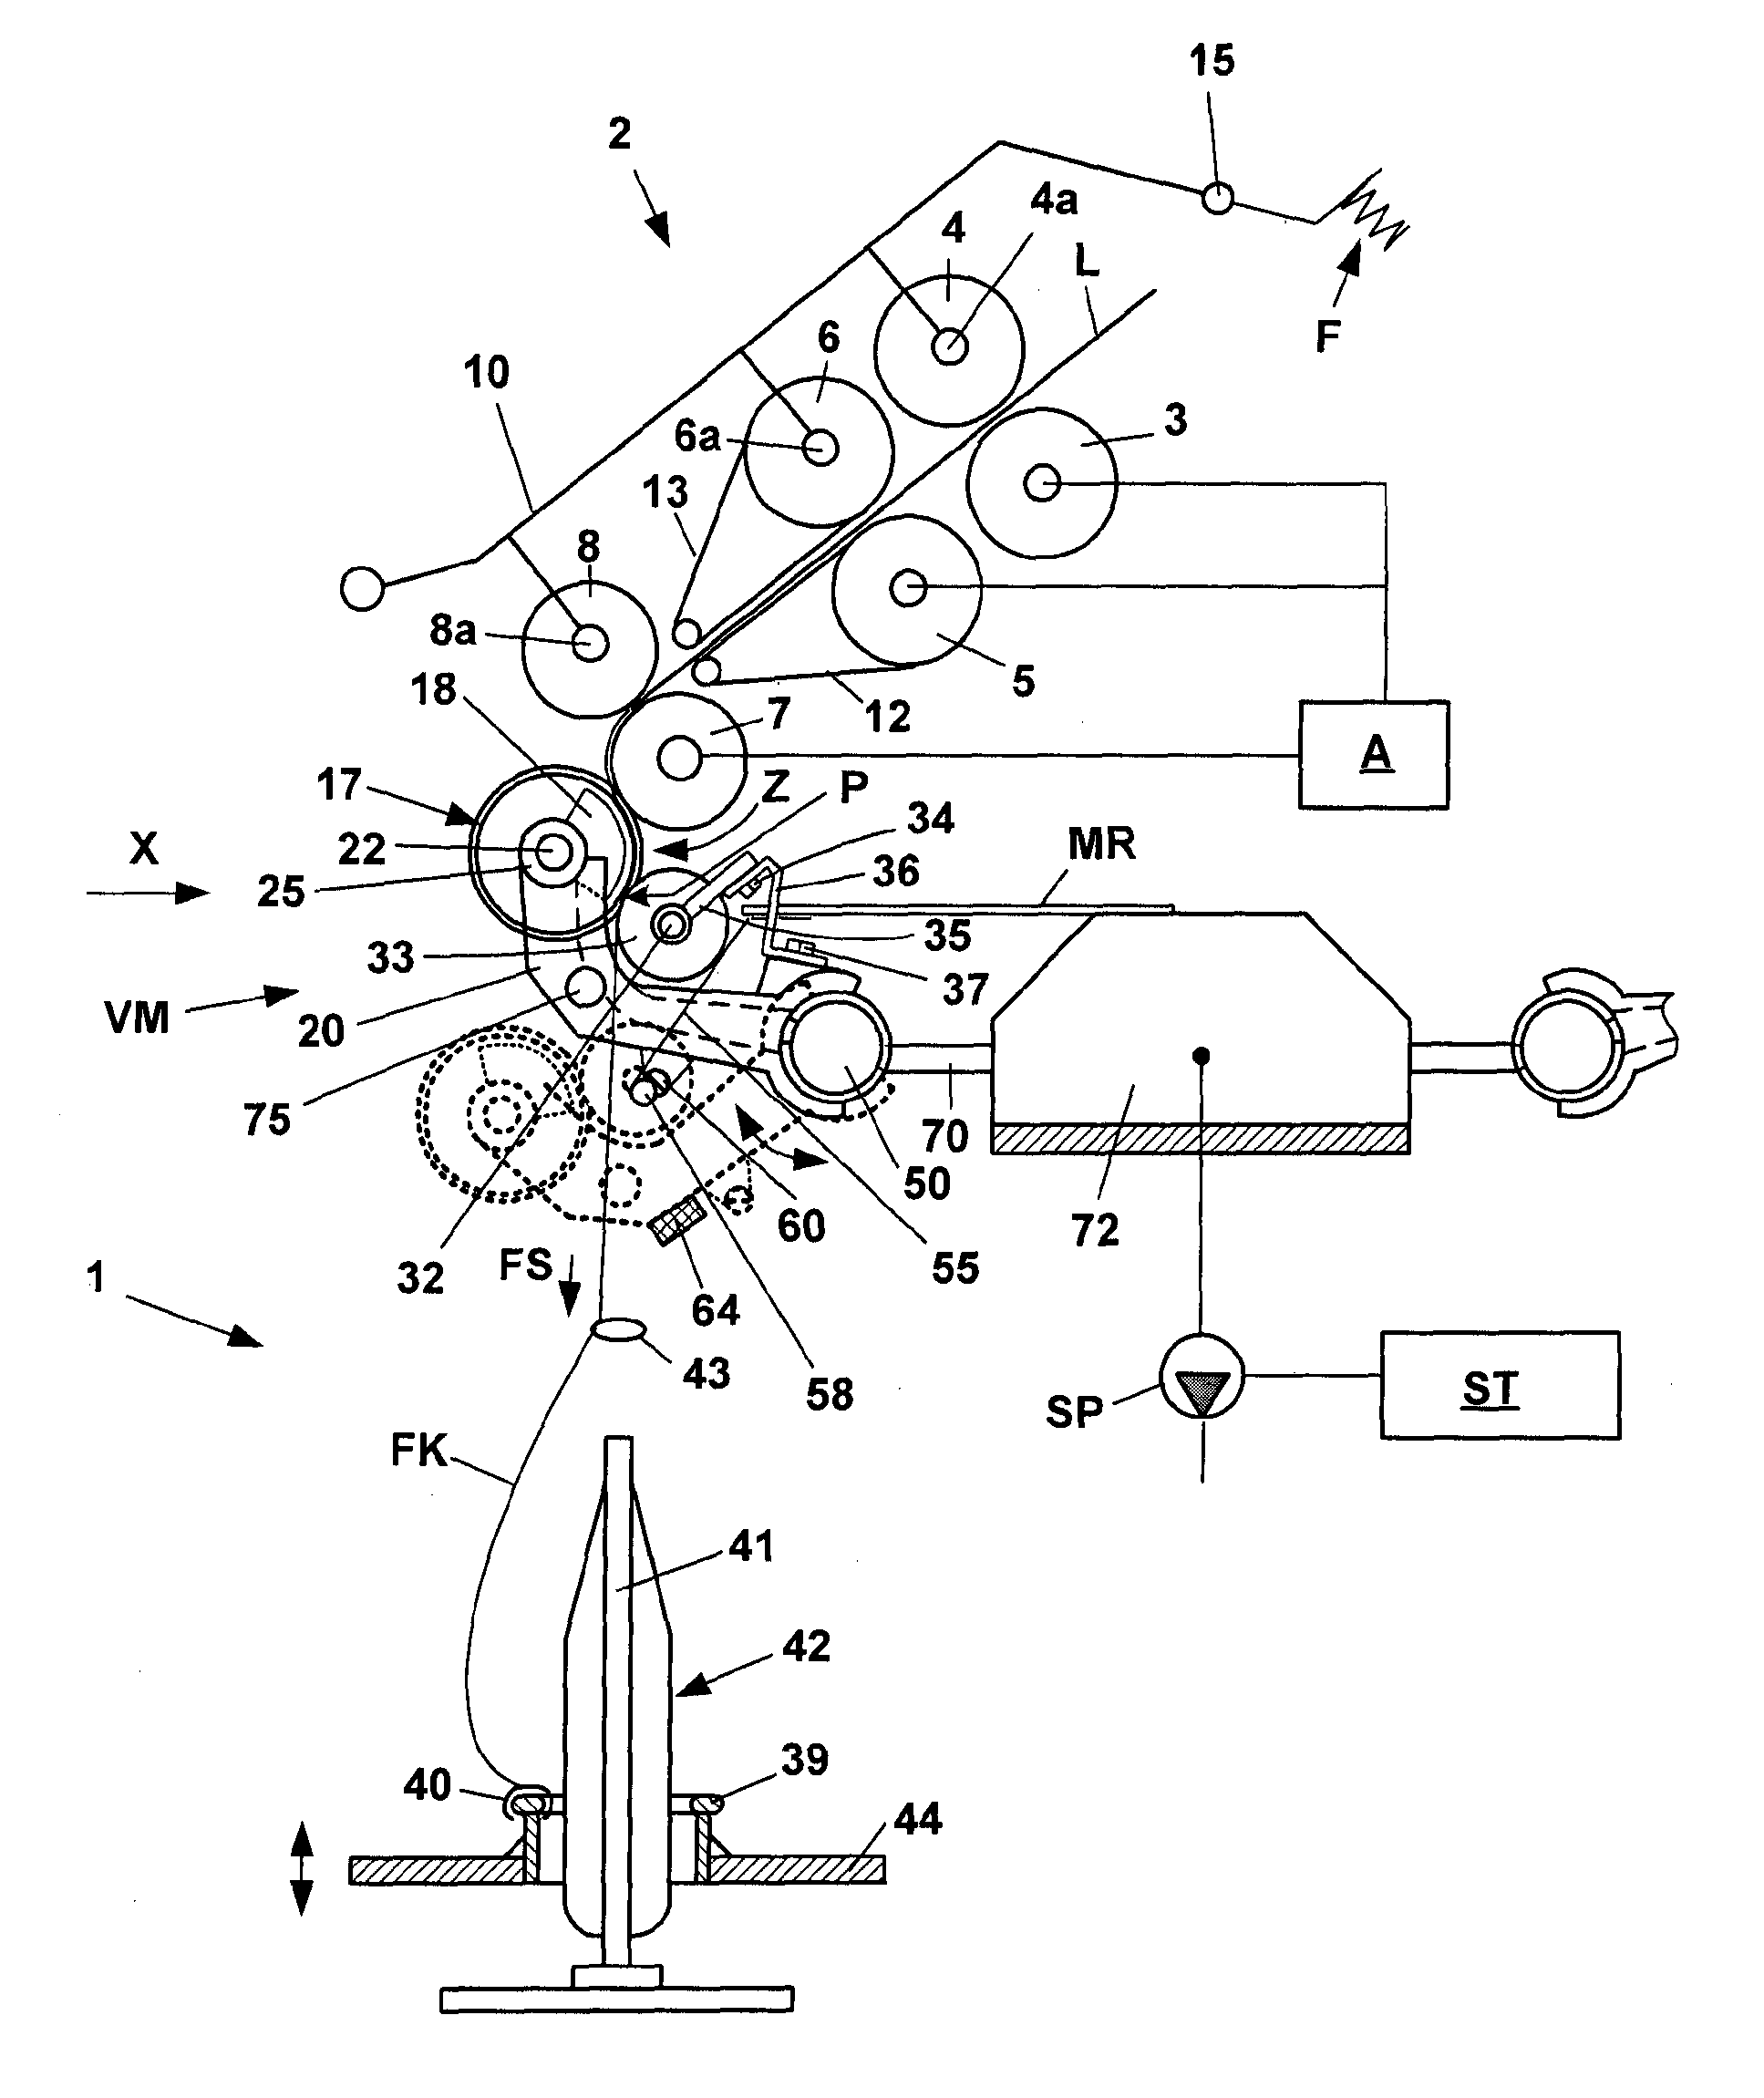 Spinning machine comprising a compaction device